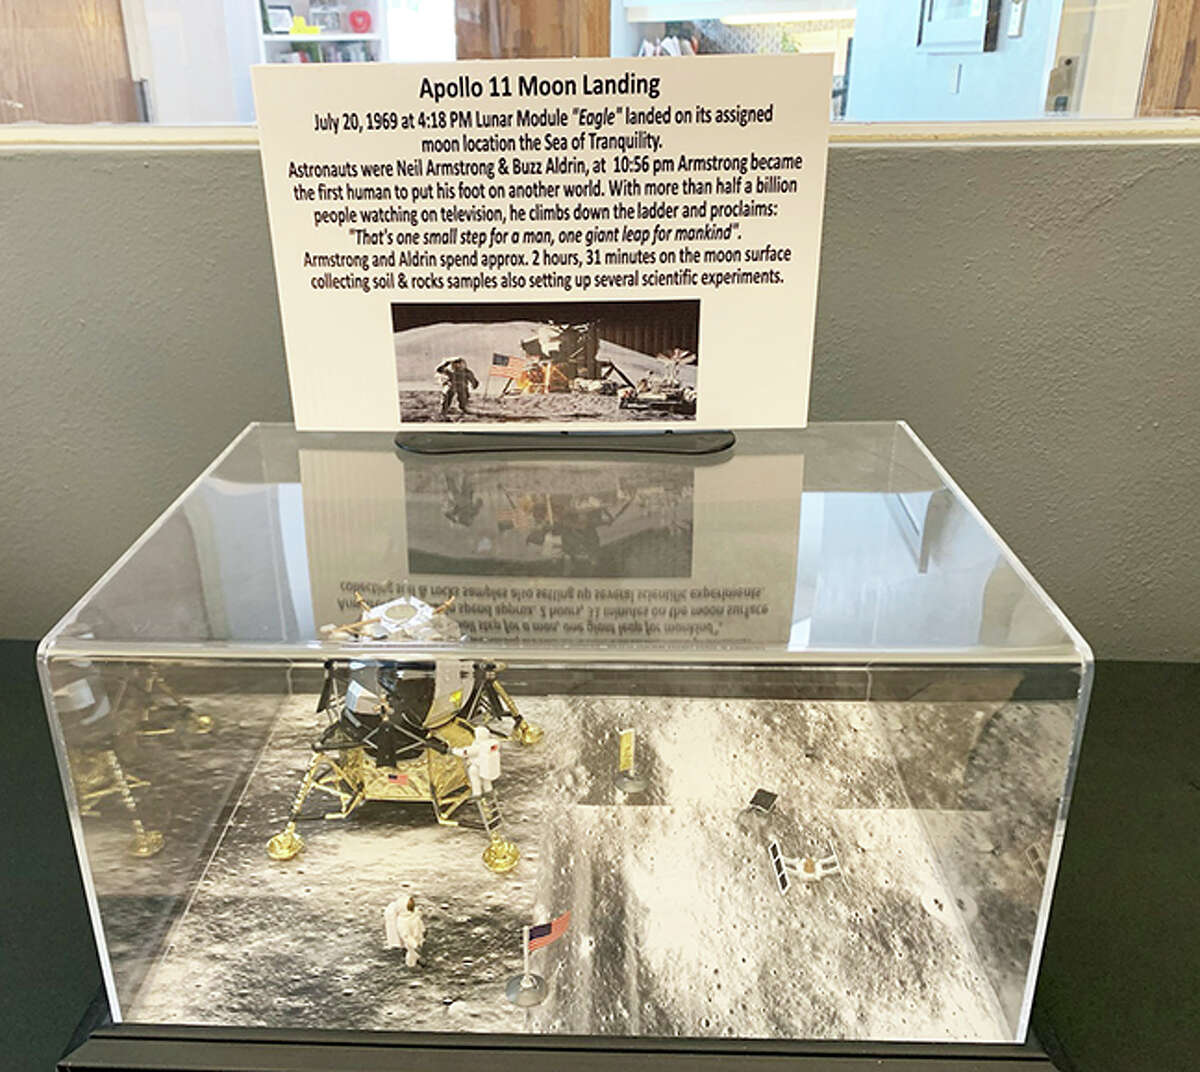 A model of the Apollo 11 moon landing is among the items from Jim Jones’ personal collection currently on display as part of “The Apollo Experience” at the Edwardsville Public Library.